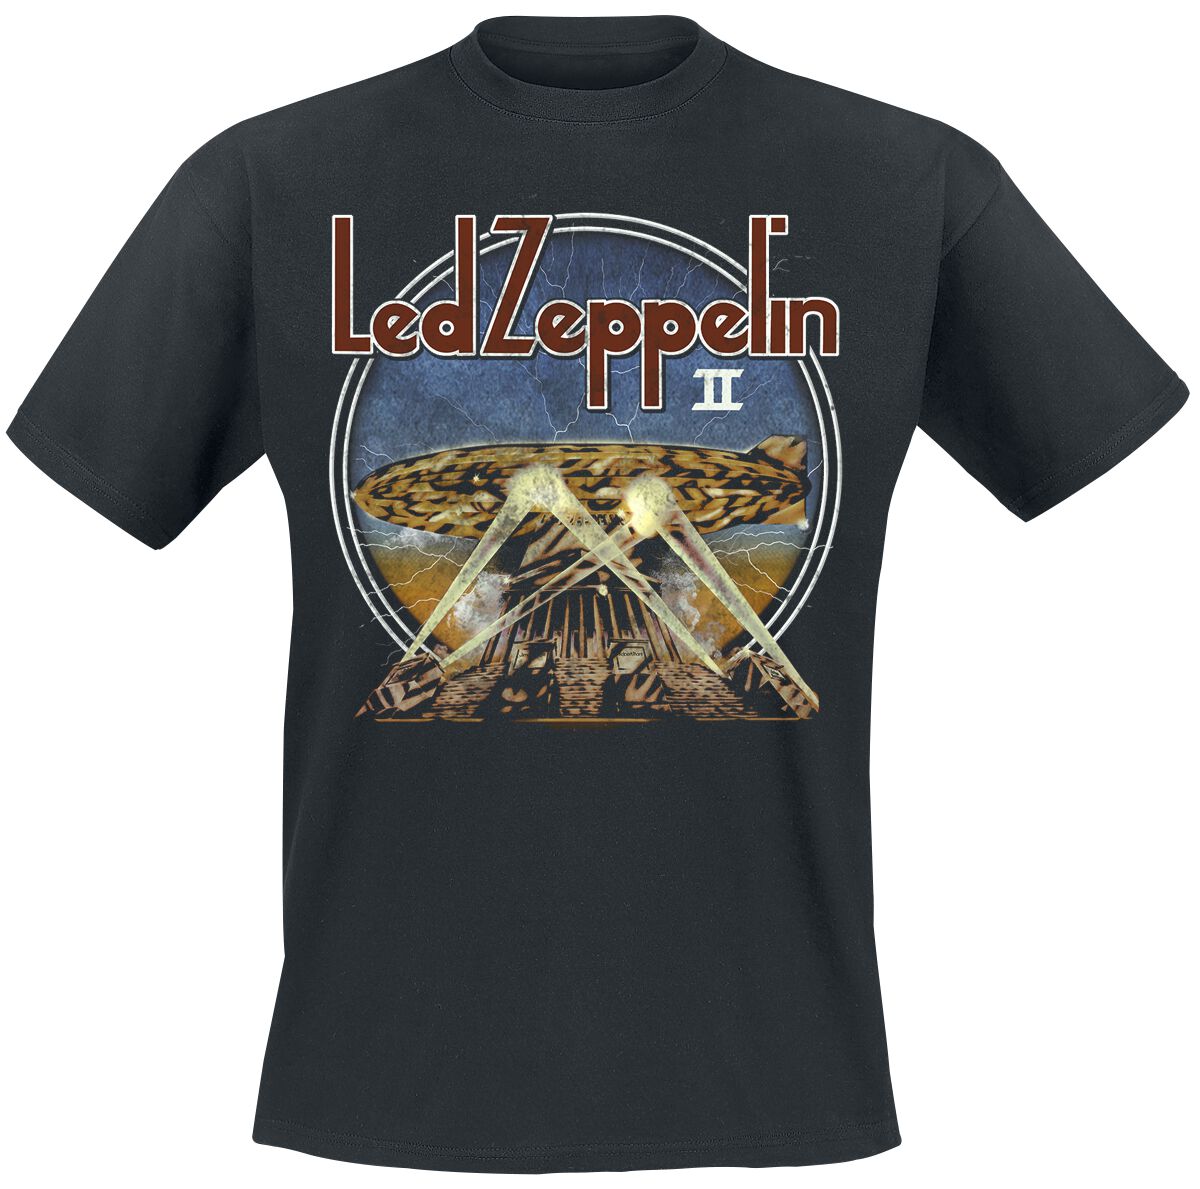 Led Zeppelin - Searchlights